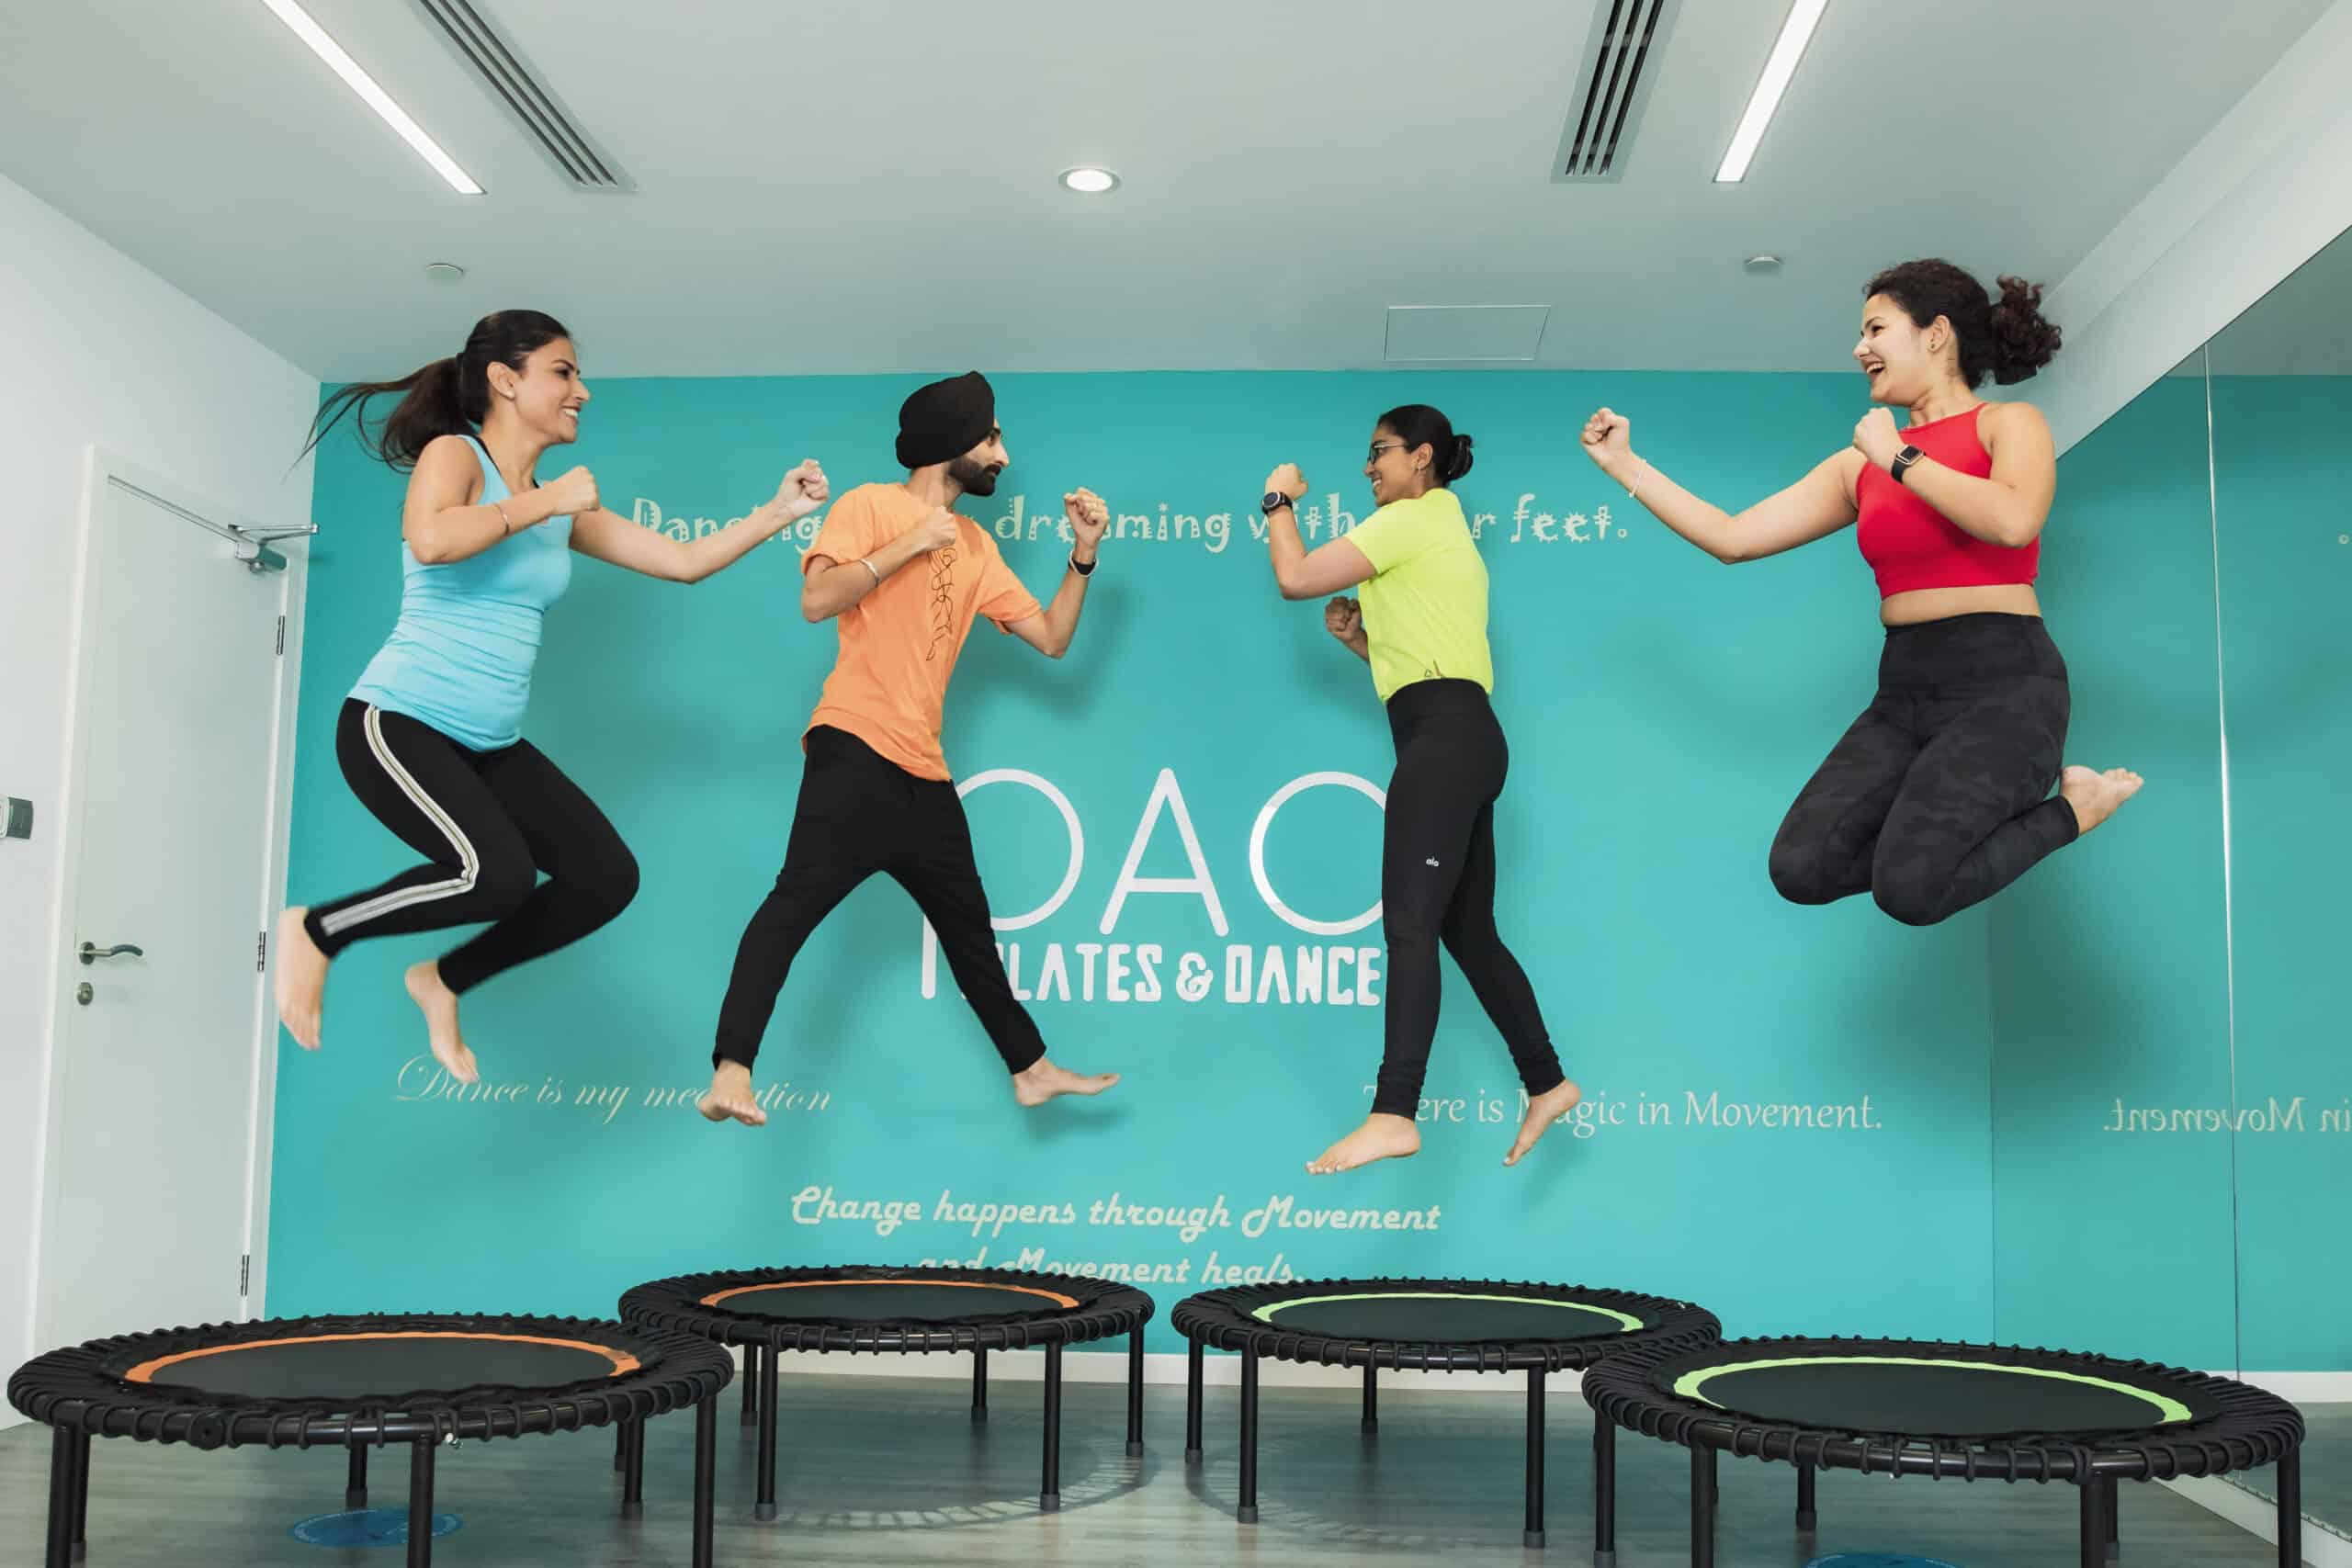 ENROL FOR FREE PILATES AND DANCE CLASSES IN DUBAI - Hotel News ME